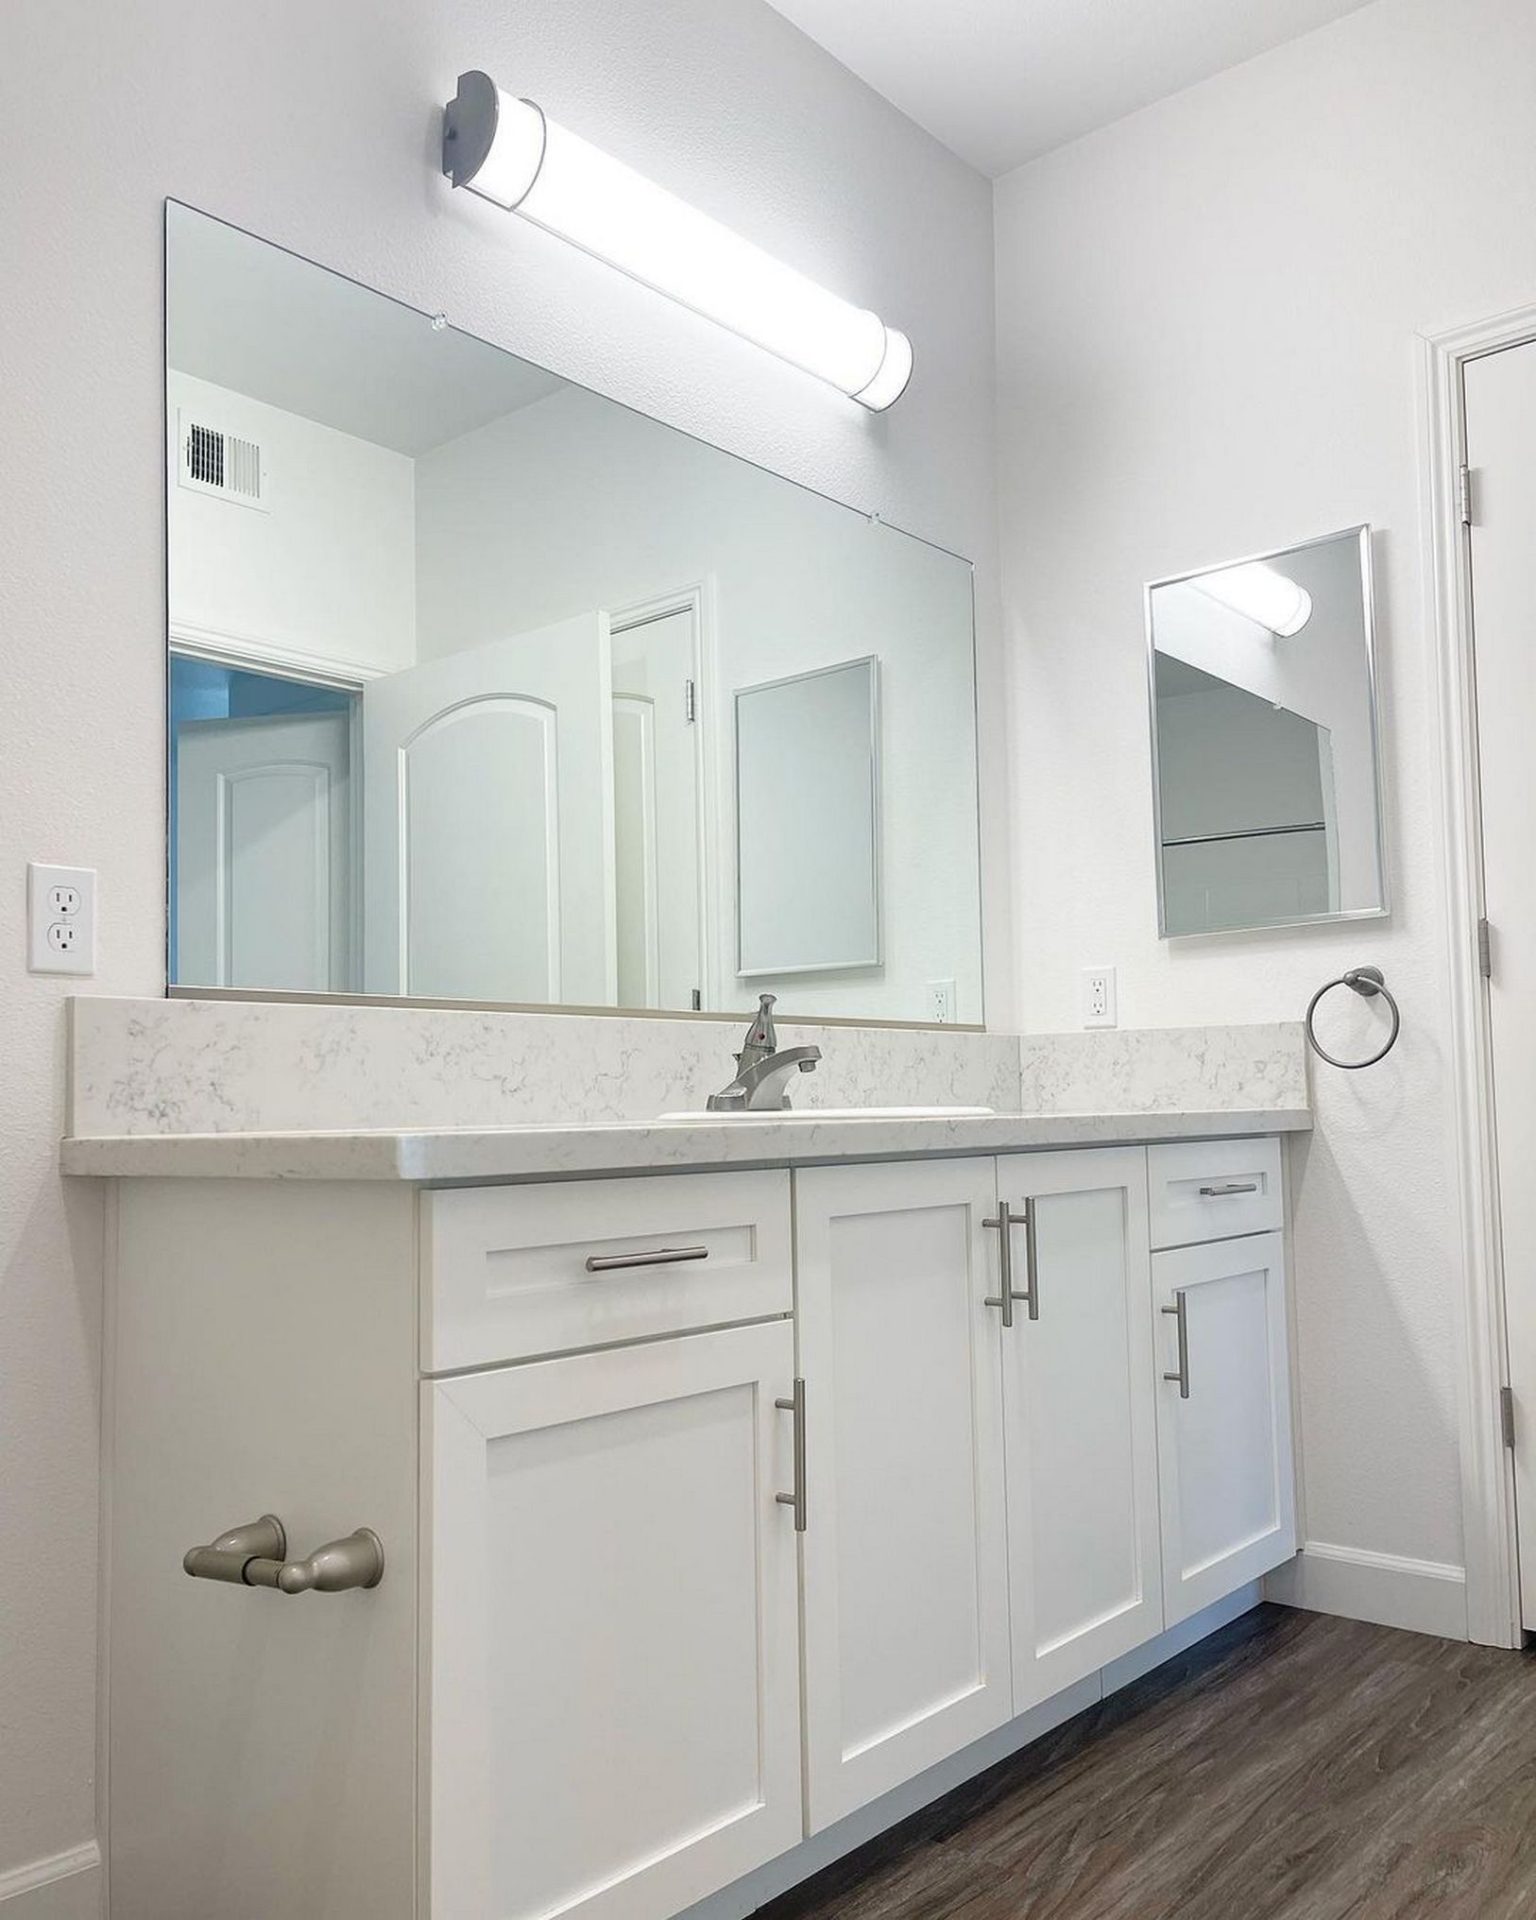 Example of Bathroom Cabinets and Sink